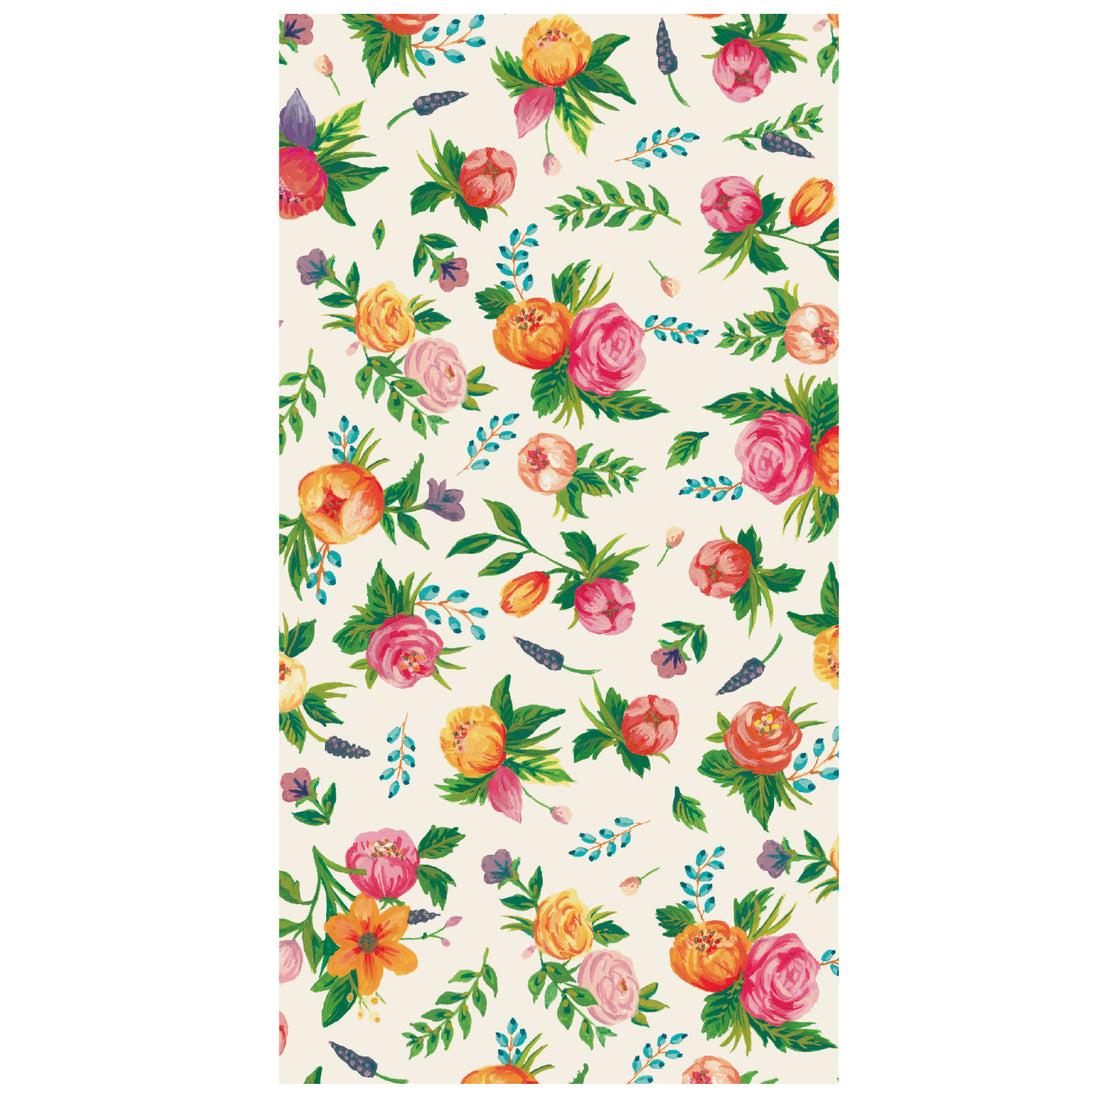 A rectangle guest napkin featuring whimsical, illustrated blossoms in pink, red, blue and orange, with green leaves, scattered on a white background.